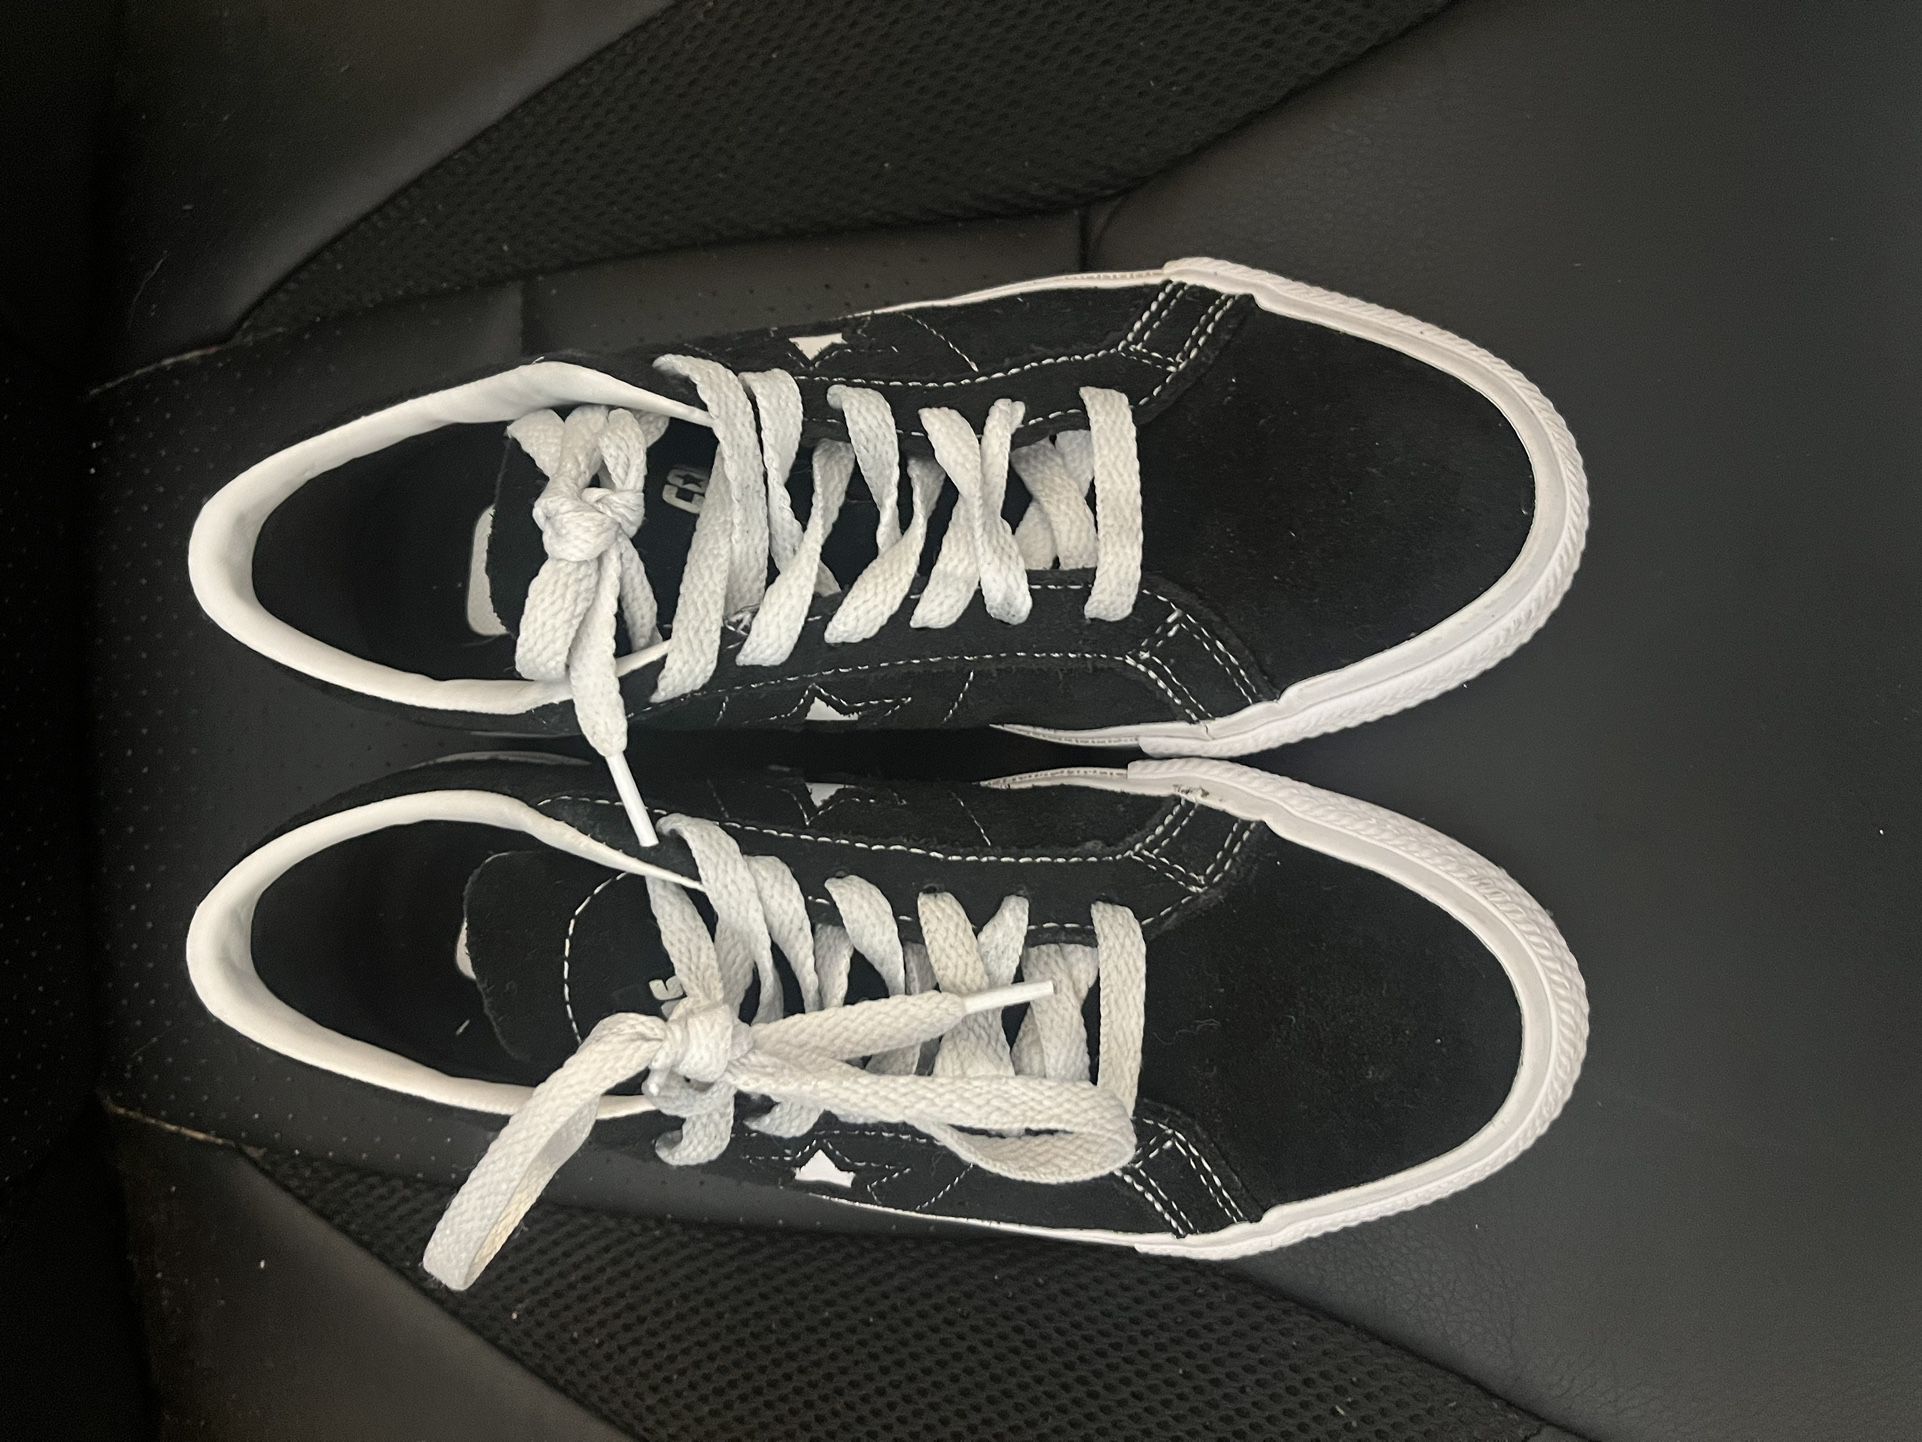 One Star Pro Converse Shoes 